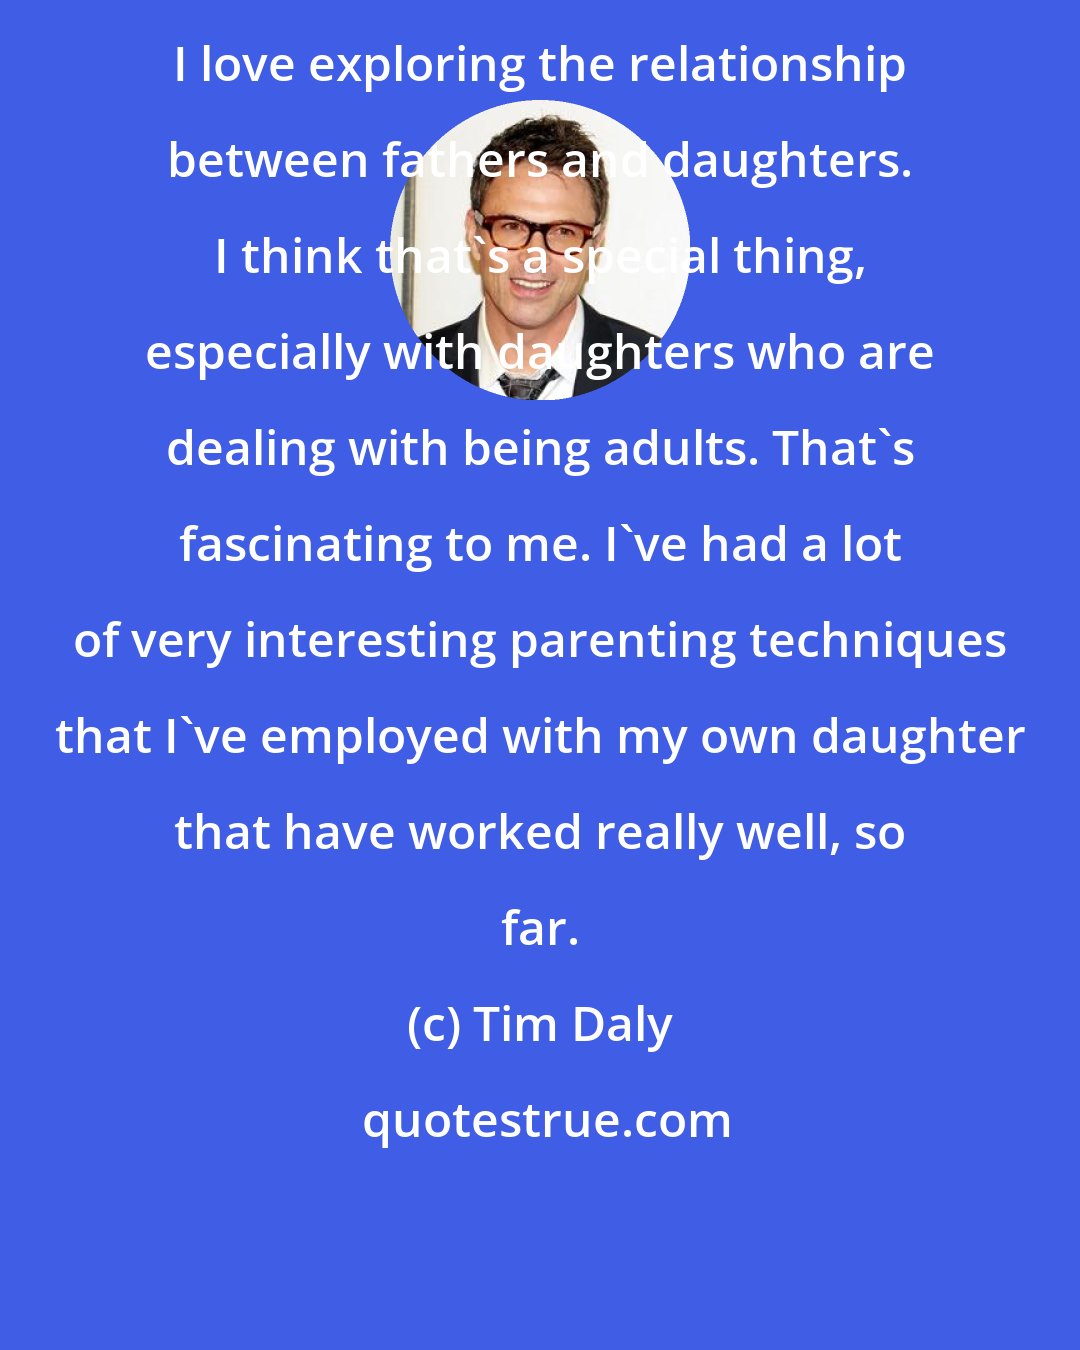 Tim Daly: I love exploring the relationship between fathers and daughters. I think that's a special thing, especially with daughters who are dealing with being adults. That's fascinating to me. I've had a lot of very interesting parenting techniques that I've employed with my own daughter that have worked really well, so far.